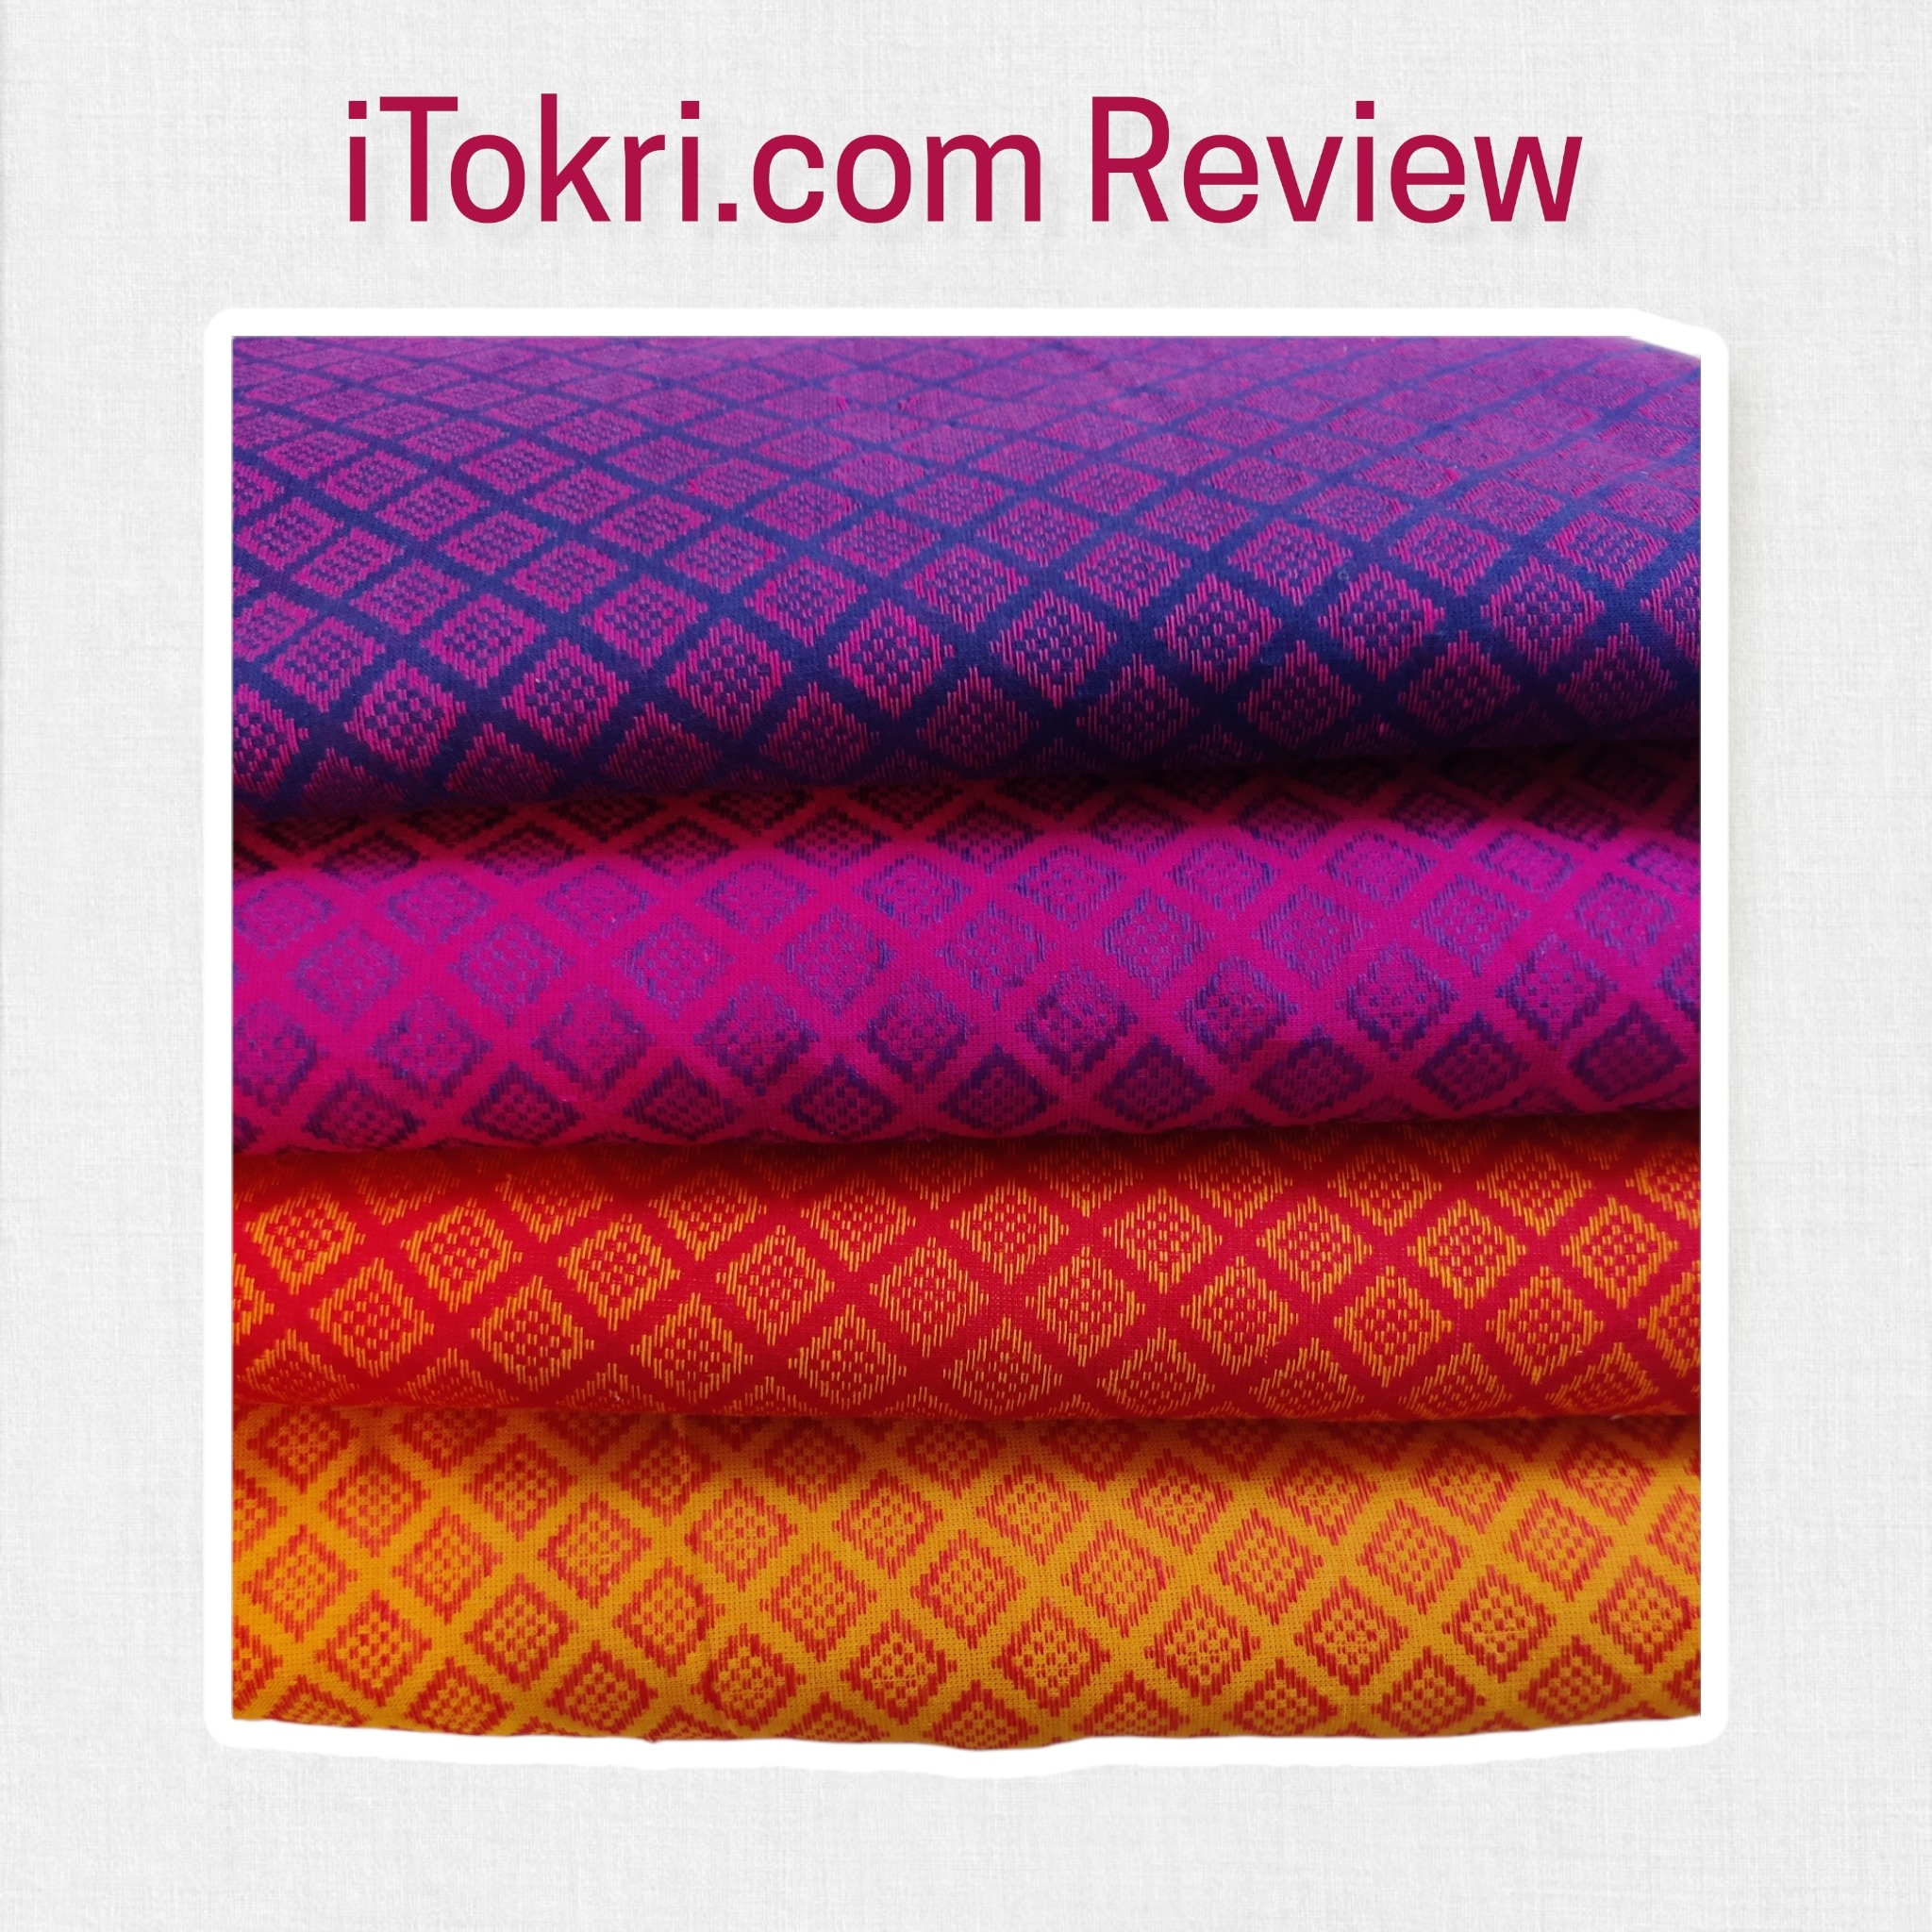 iTokri Review and Shopping Experience